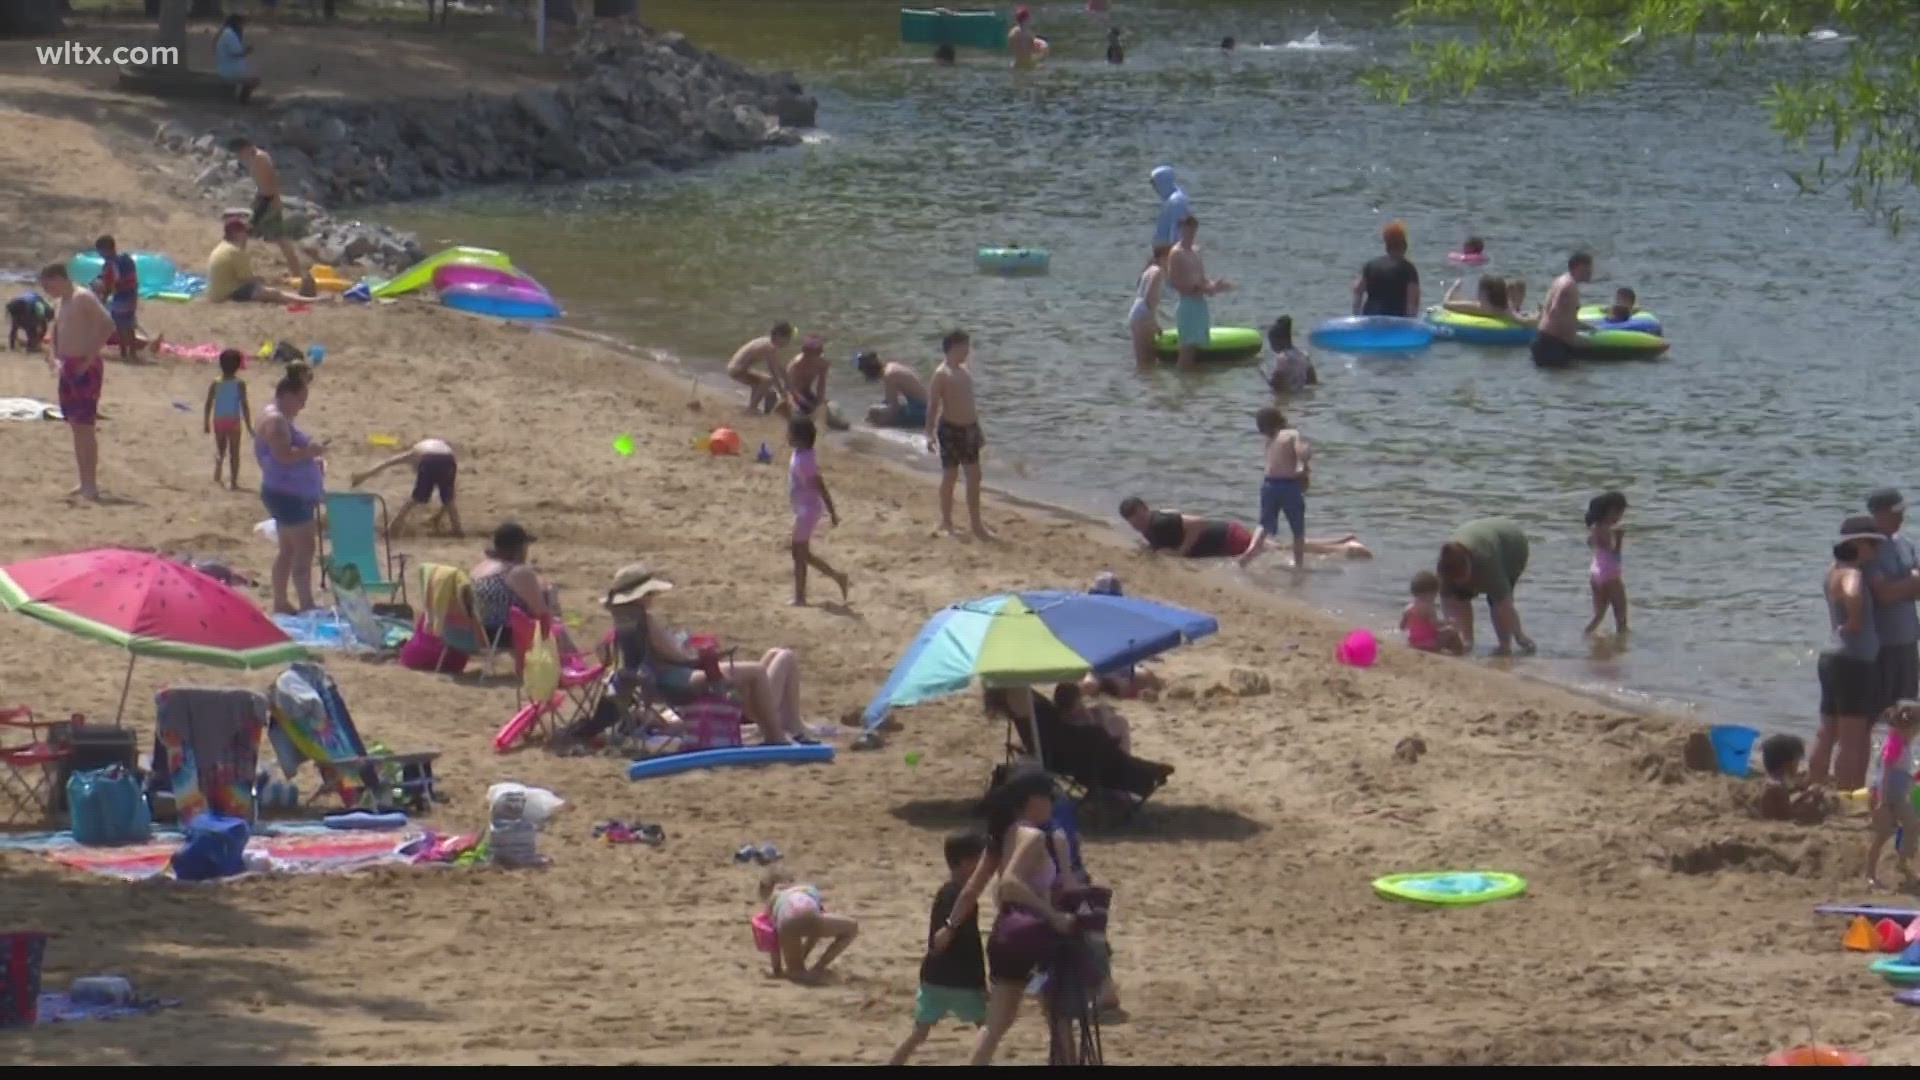 With the weather getting warmer, you may be looking to jump in a pool or ride the waves at the beach.  News19 is on your side with some water safety tips.